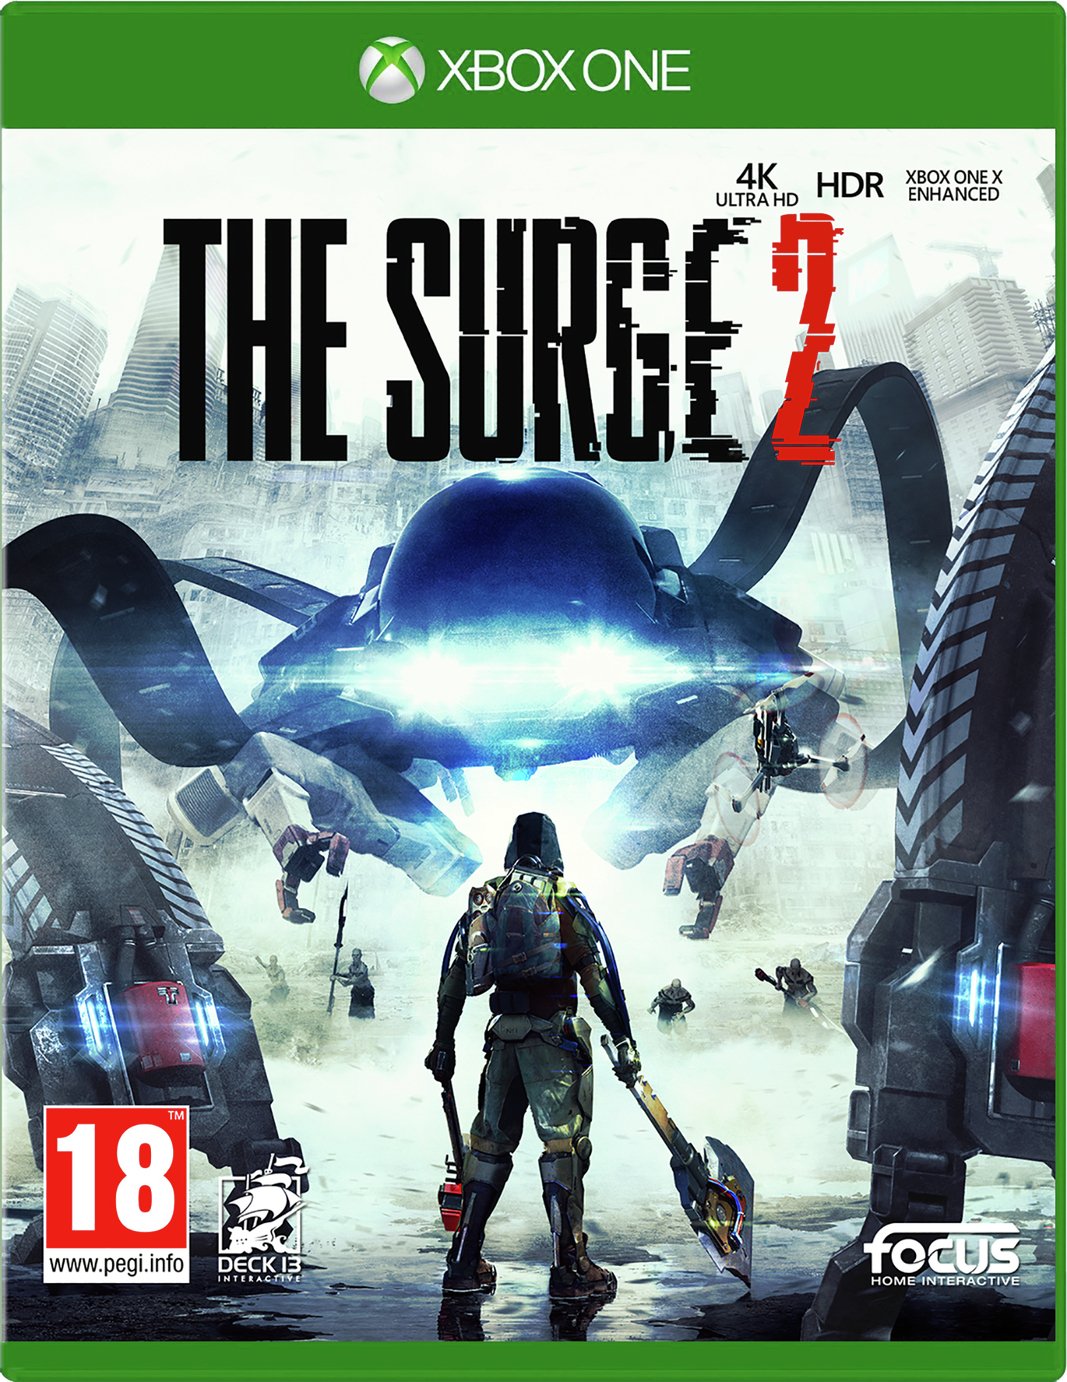 The Surge 2 Xbox One Game